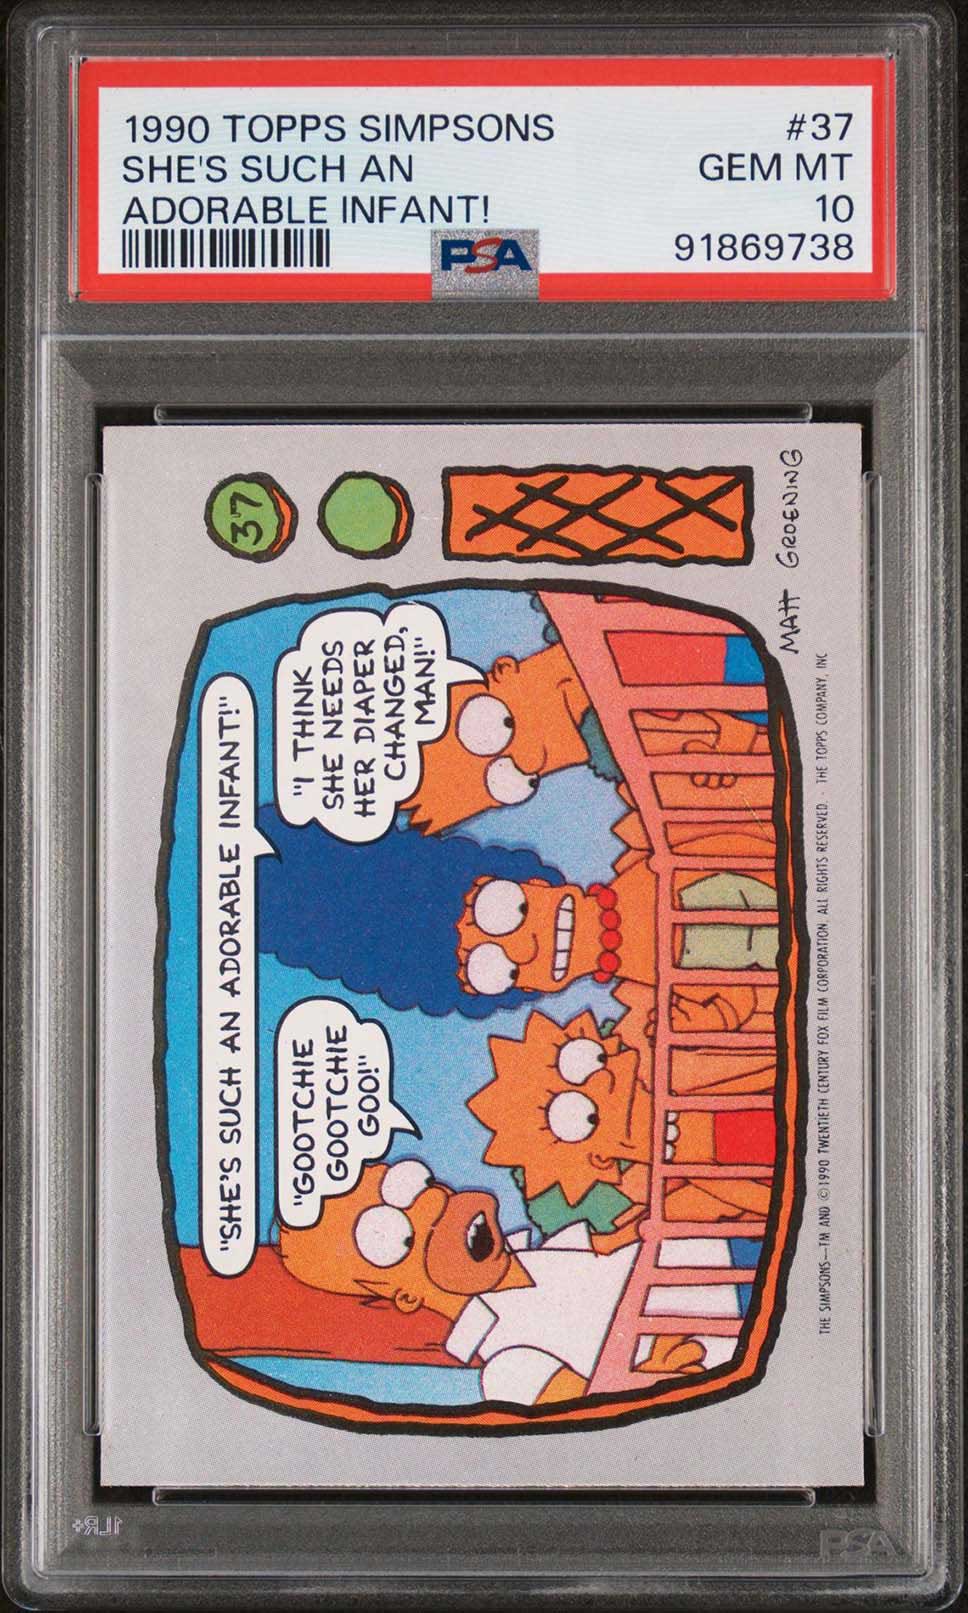 BART HOMER LISA MARGE SIMPSON 1990 PSA 10 Topps The Simpsons She's Such an Adorable Infant! #37 The Simpsons Base Graded Cards - Hobby Gems